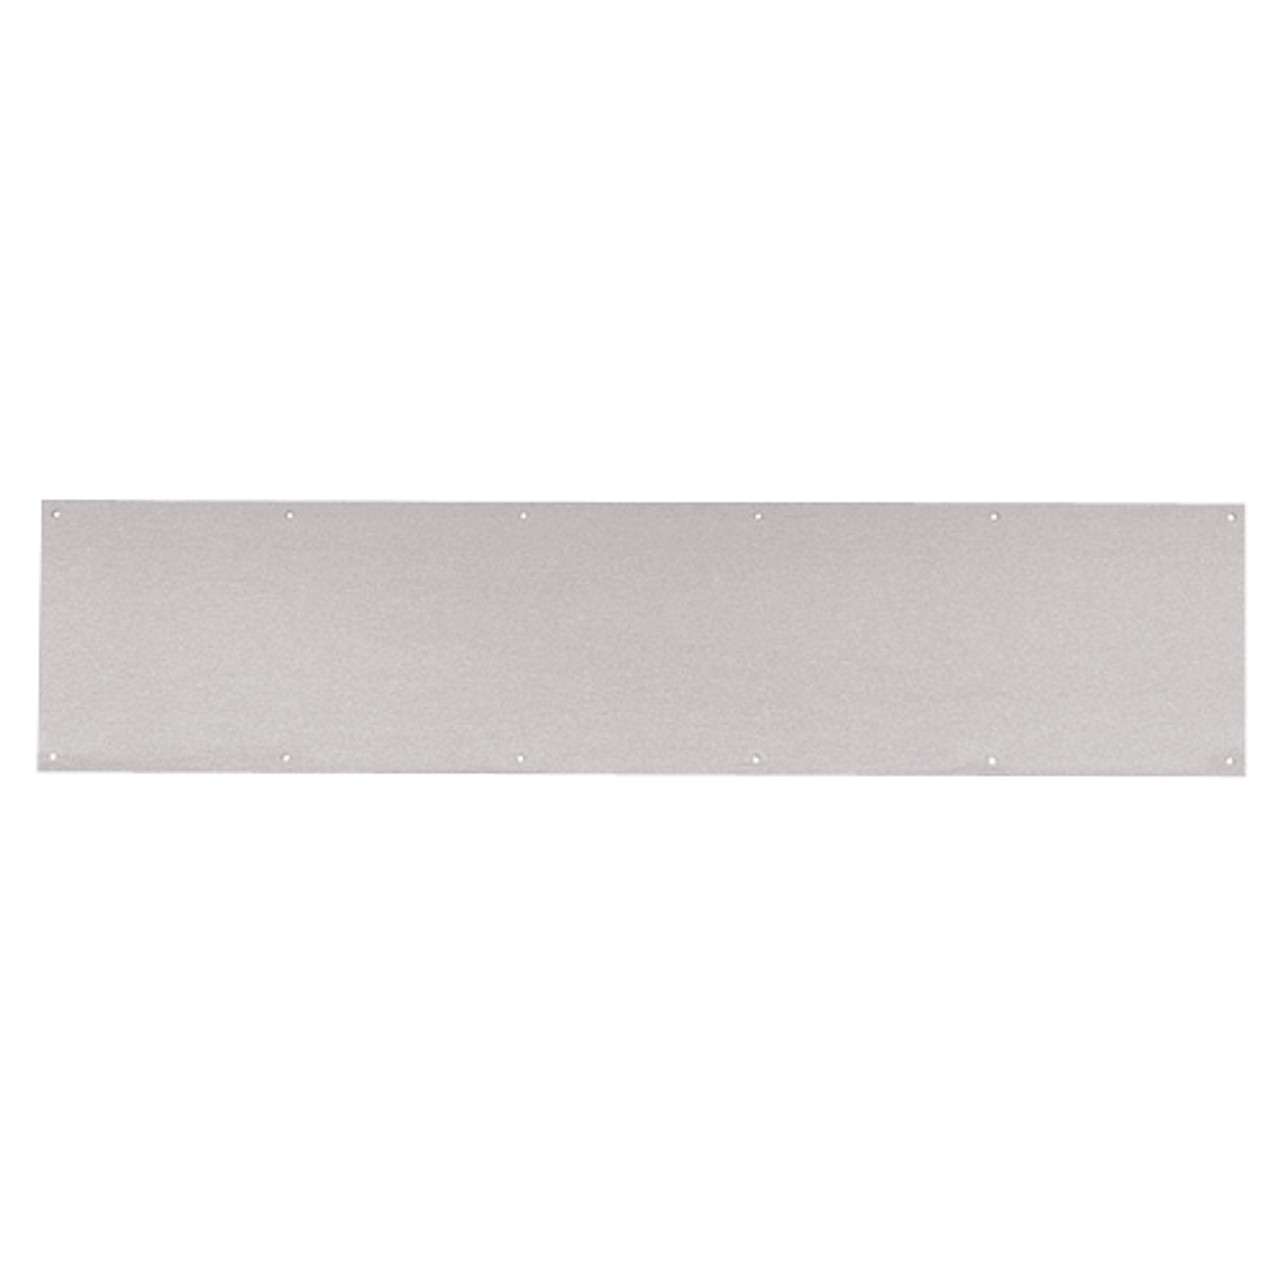 8400-US32D-8x28-B-CS Ives 8400 Series Protection Plate in Satin Stainless Steel